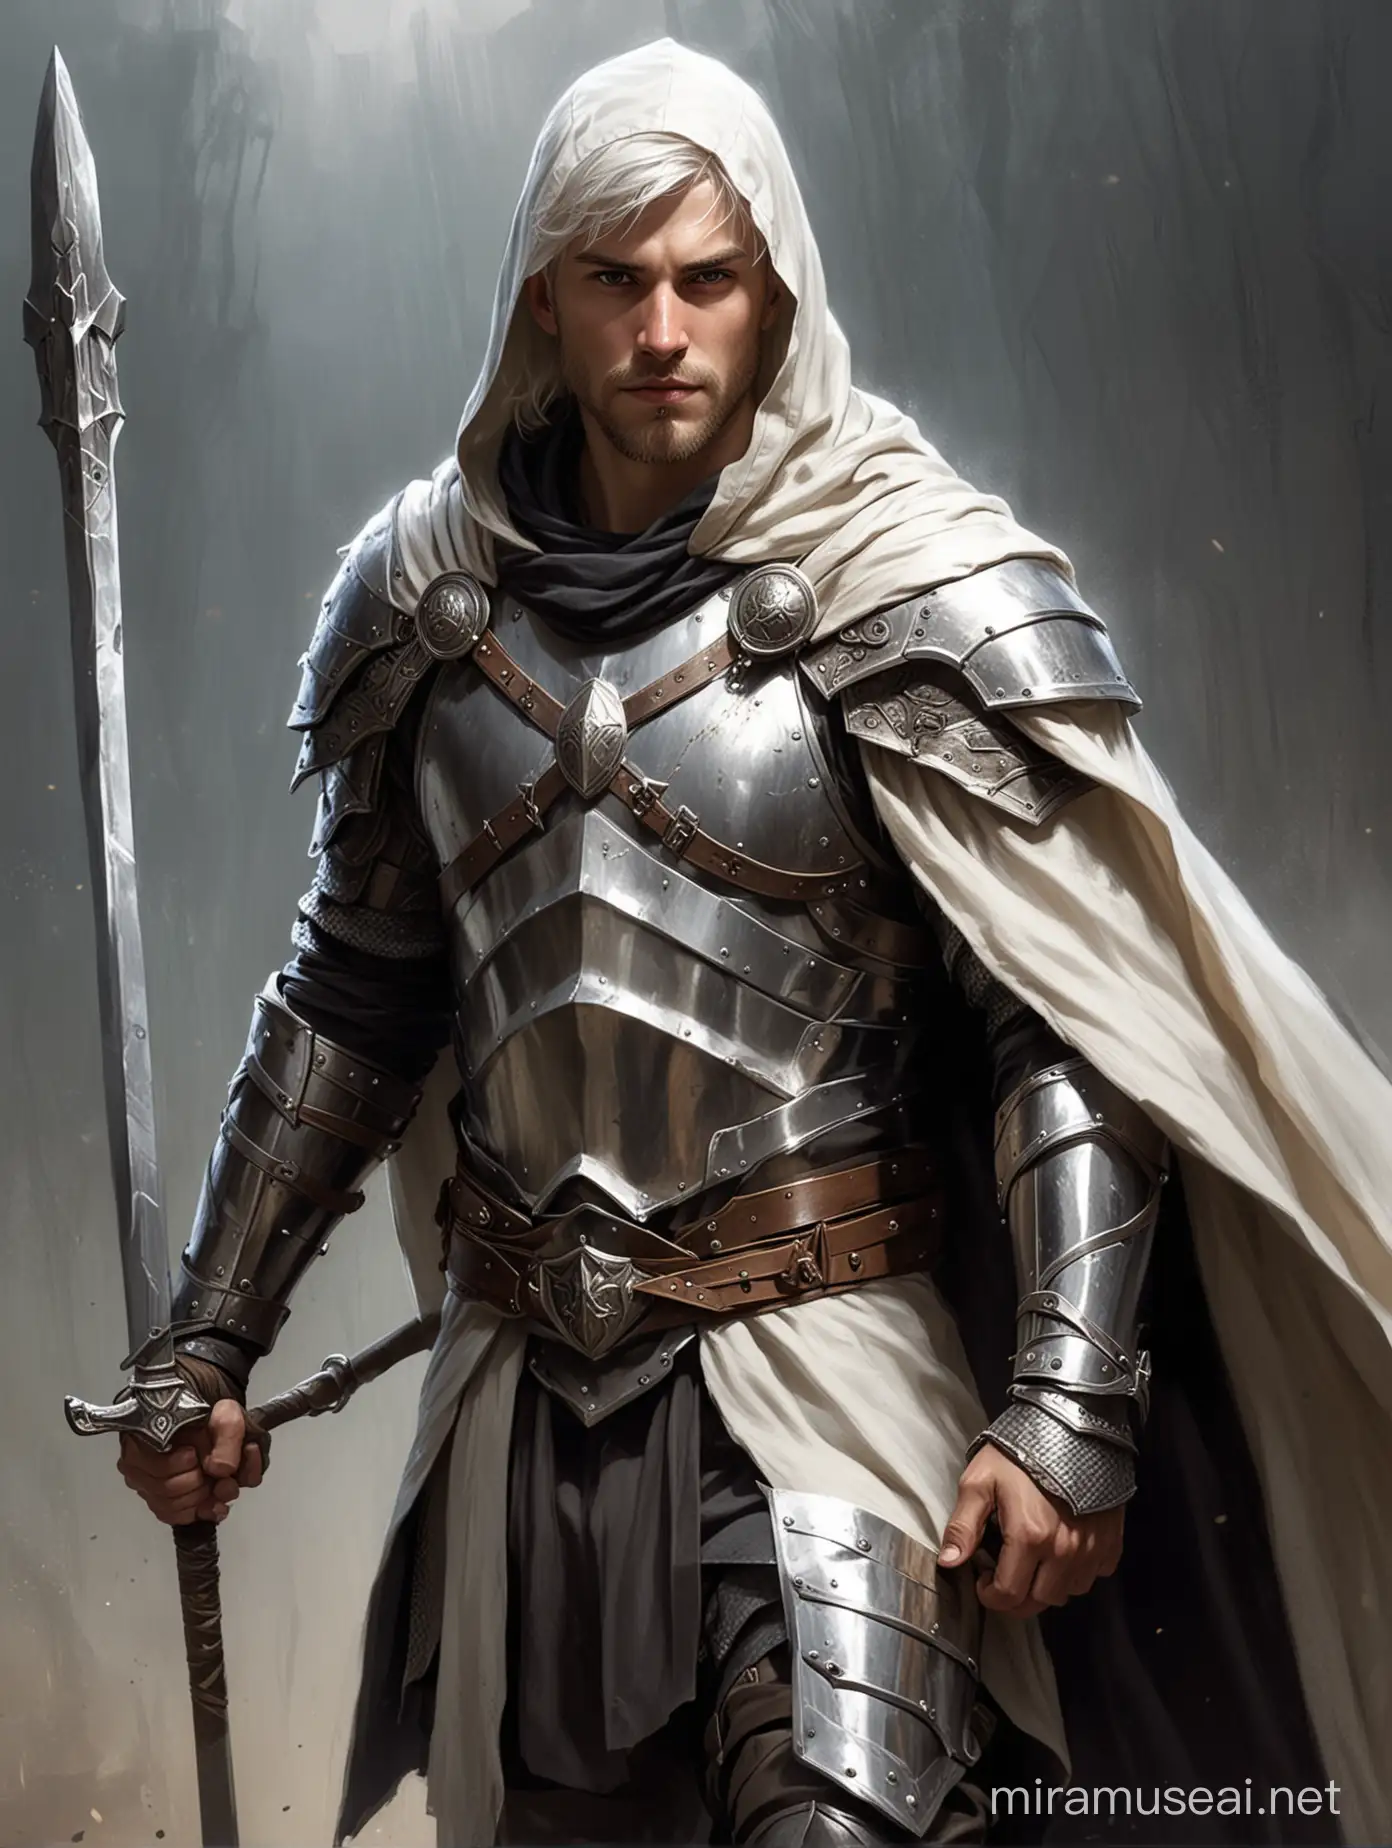 Human Caucasian, male, 25 years old, athletic, white short hair, short beard, intimidating face, paladin, wearing ring mail armor, a hooded cape and carrying a spear in one hand and a shield on the other